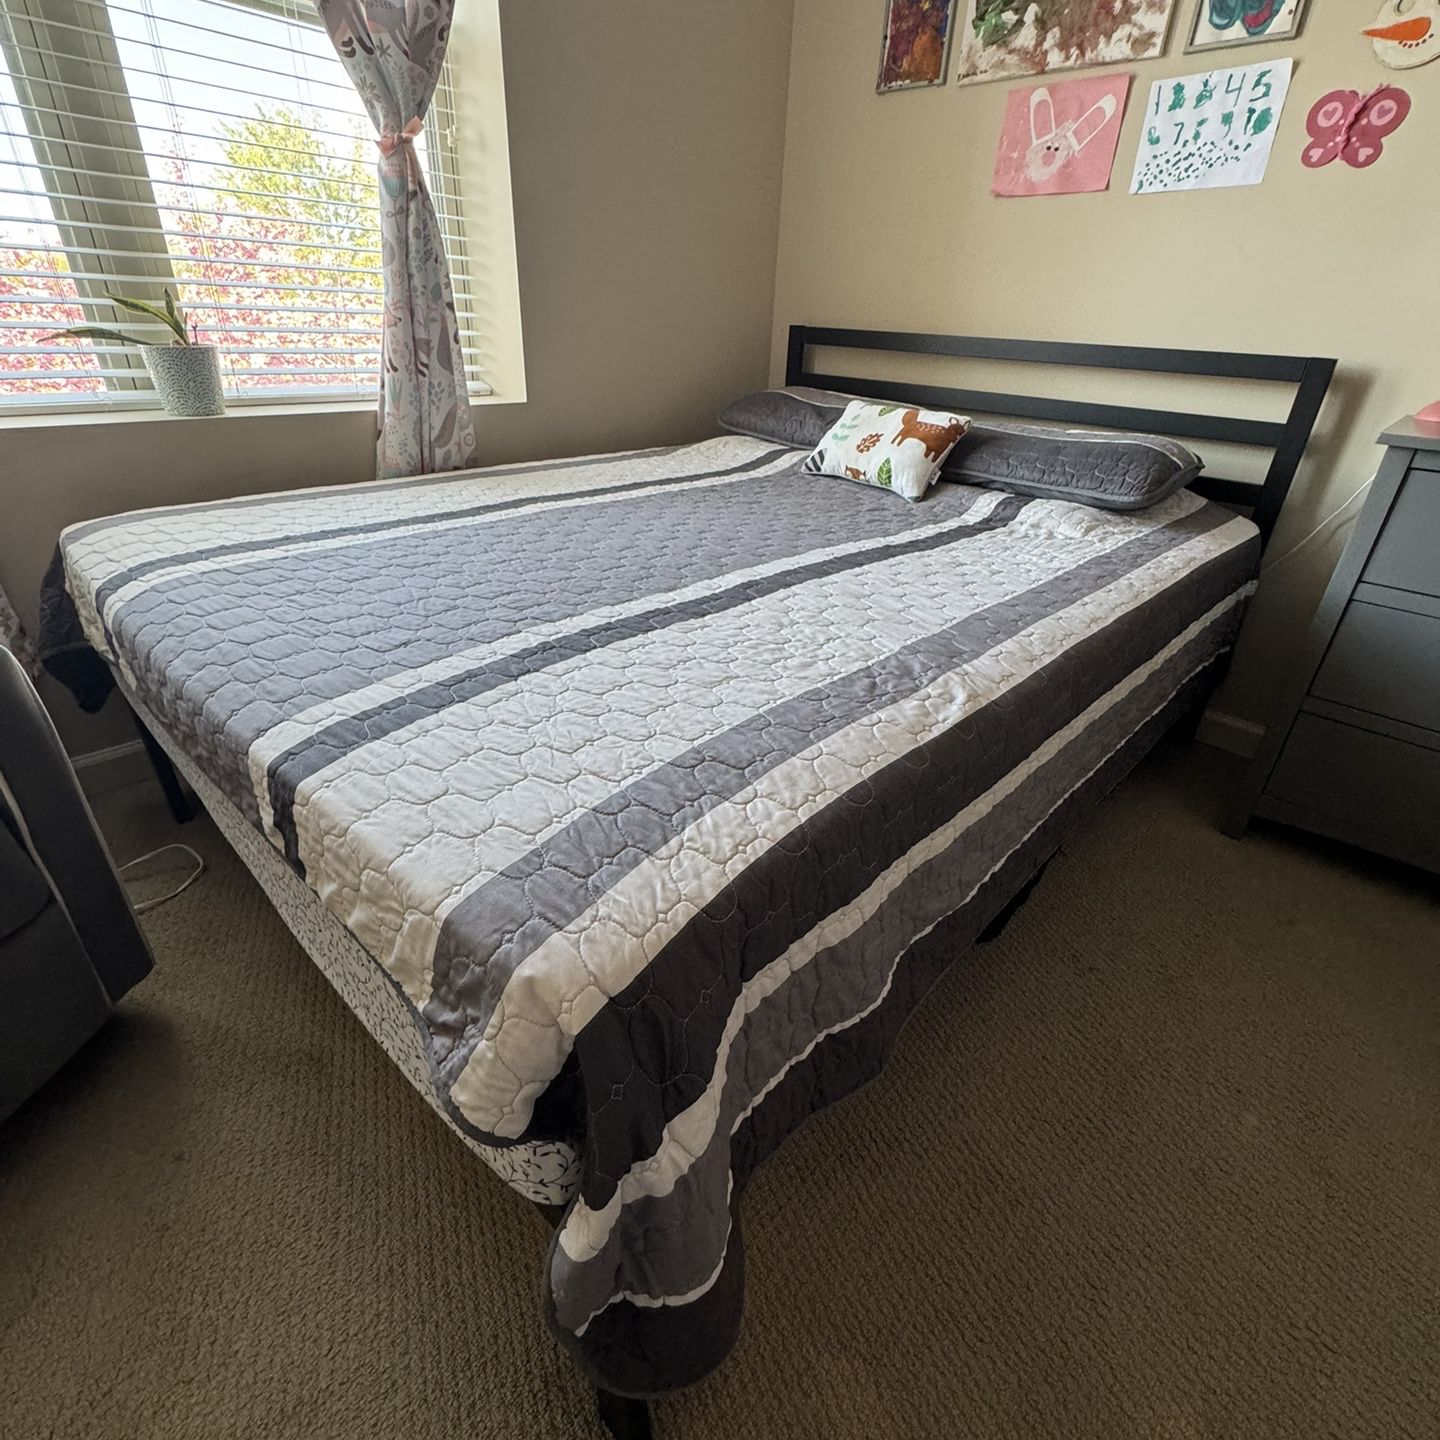 Queen Size Bed With Mattress!!